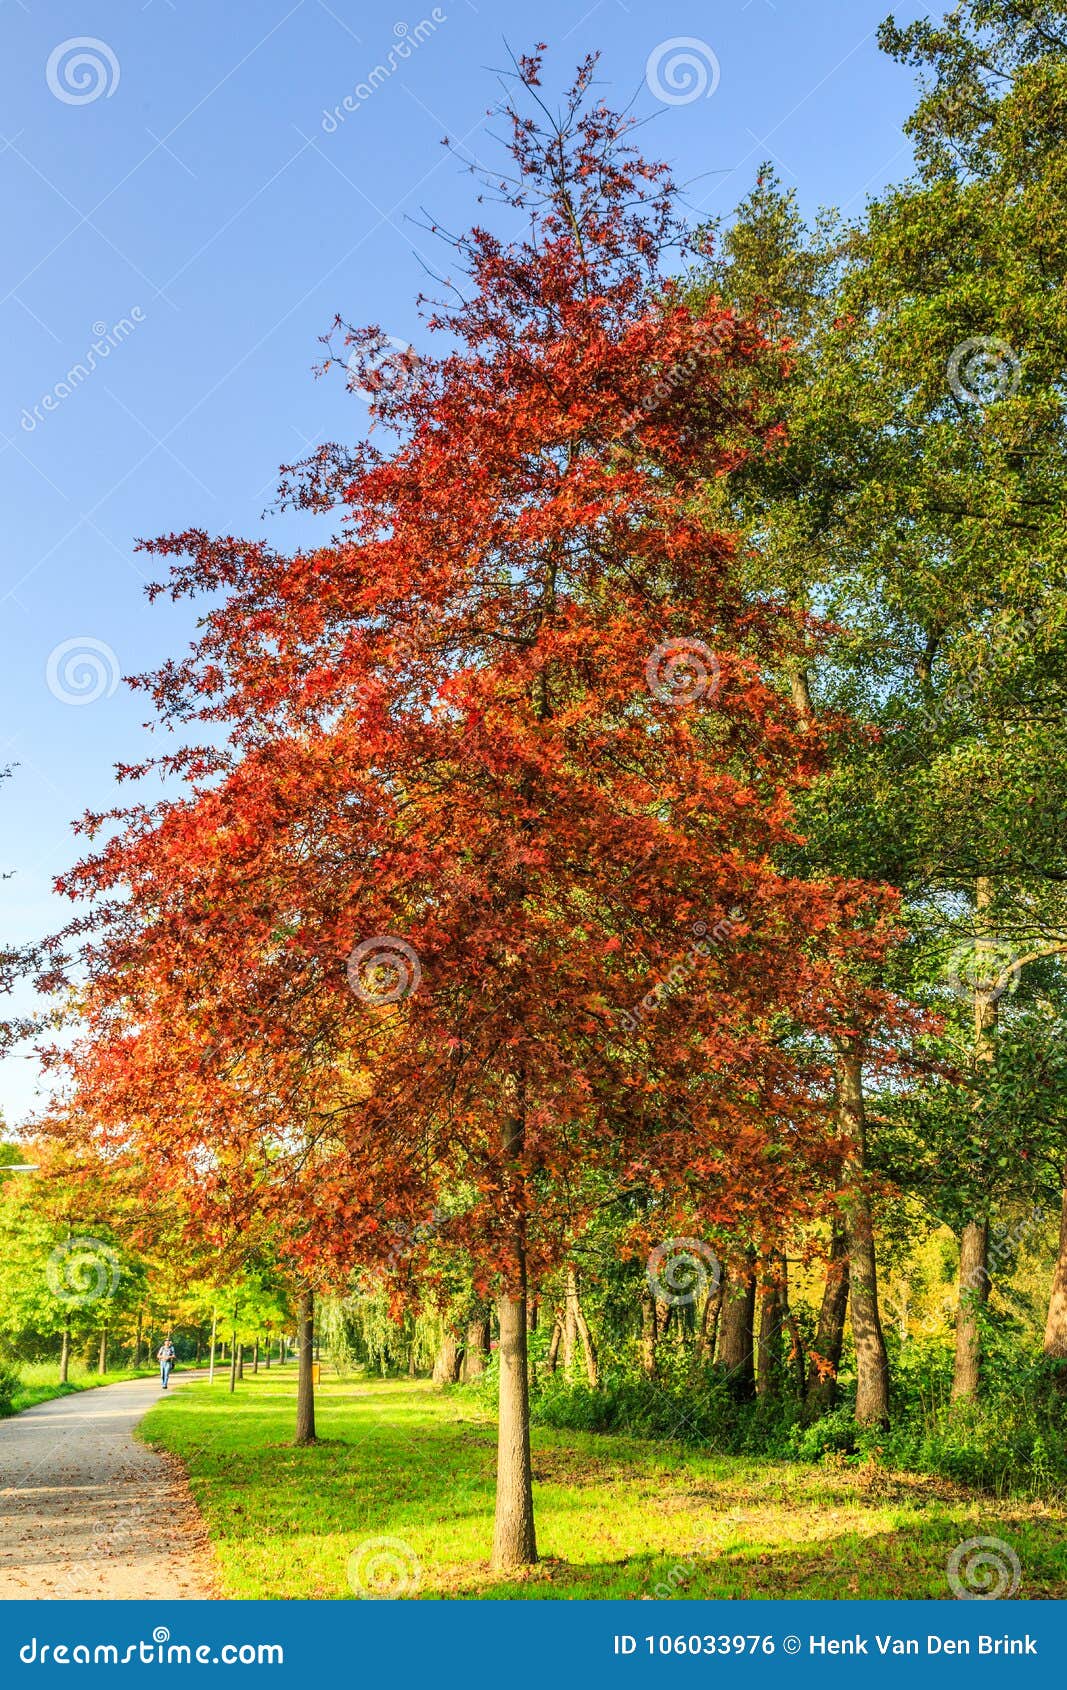 pin oak, quercus palustris as a street tree planted in the roadside